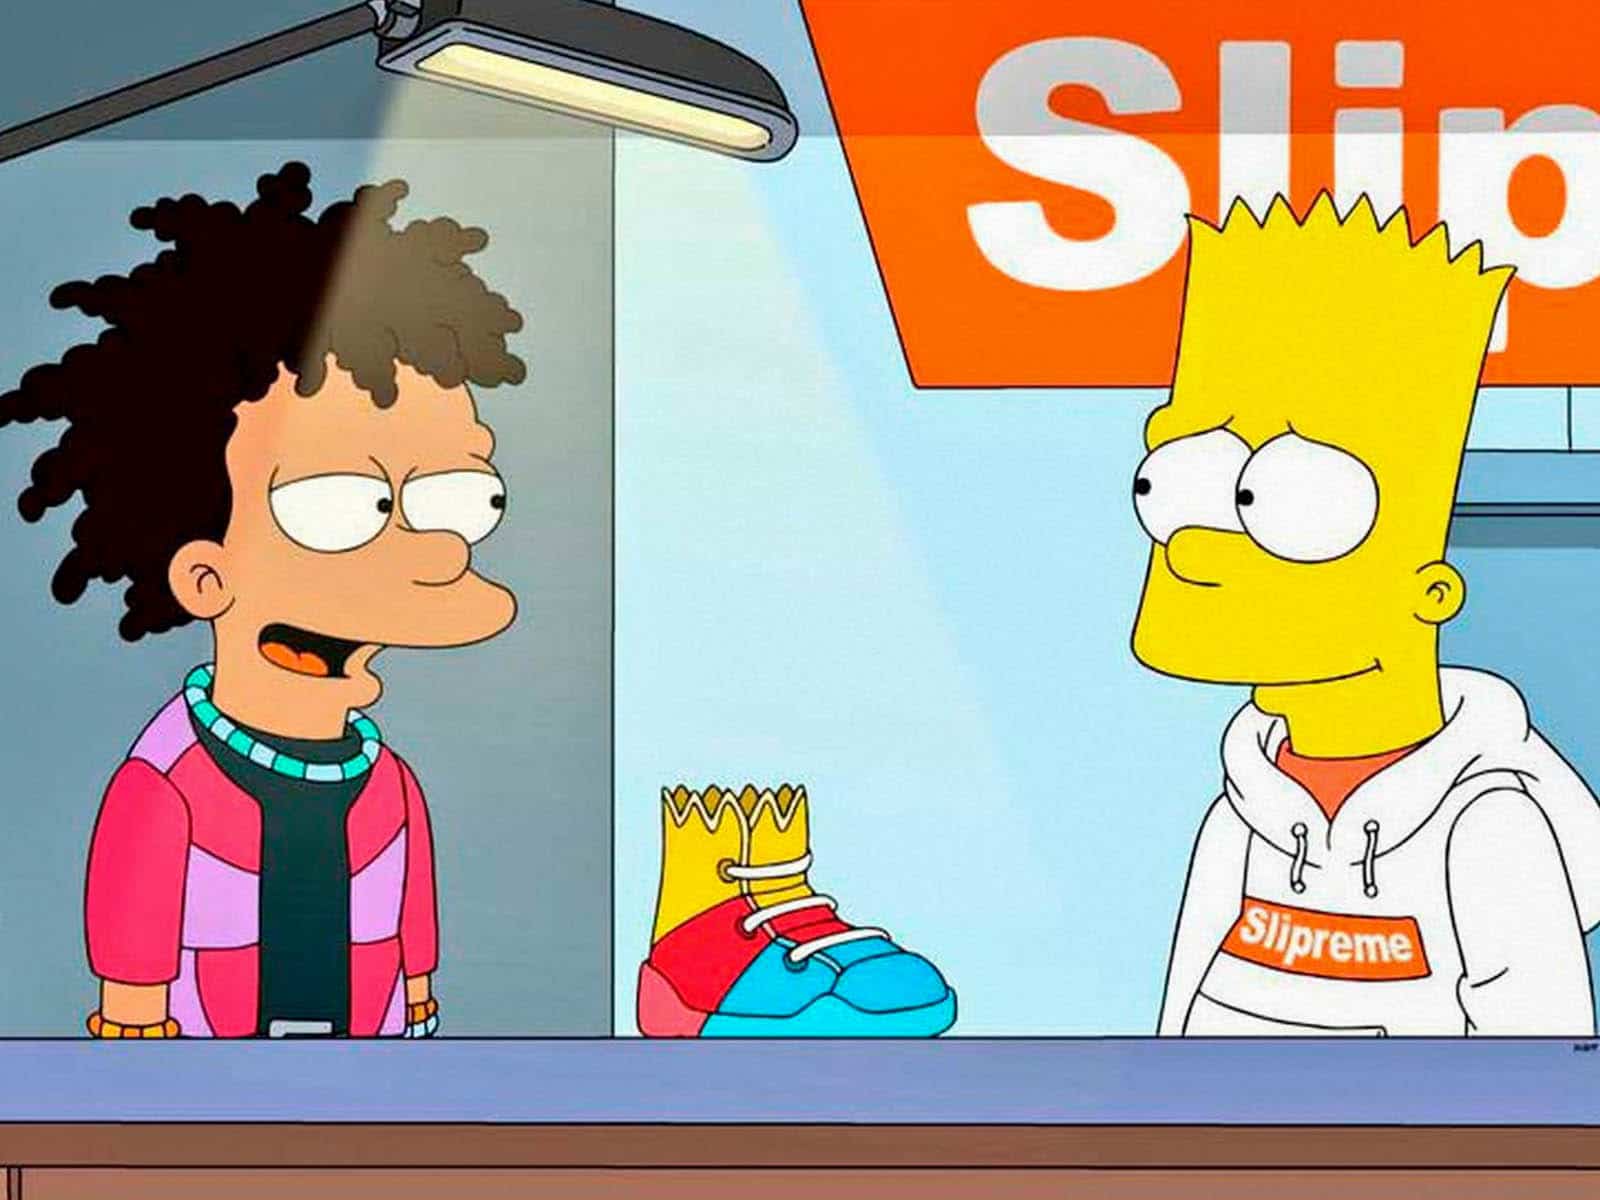 The Simpsons parody streetwear culture with Supreme and The Weeknd